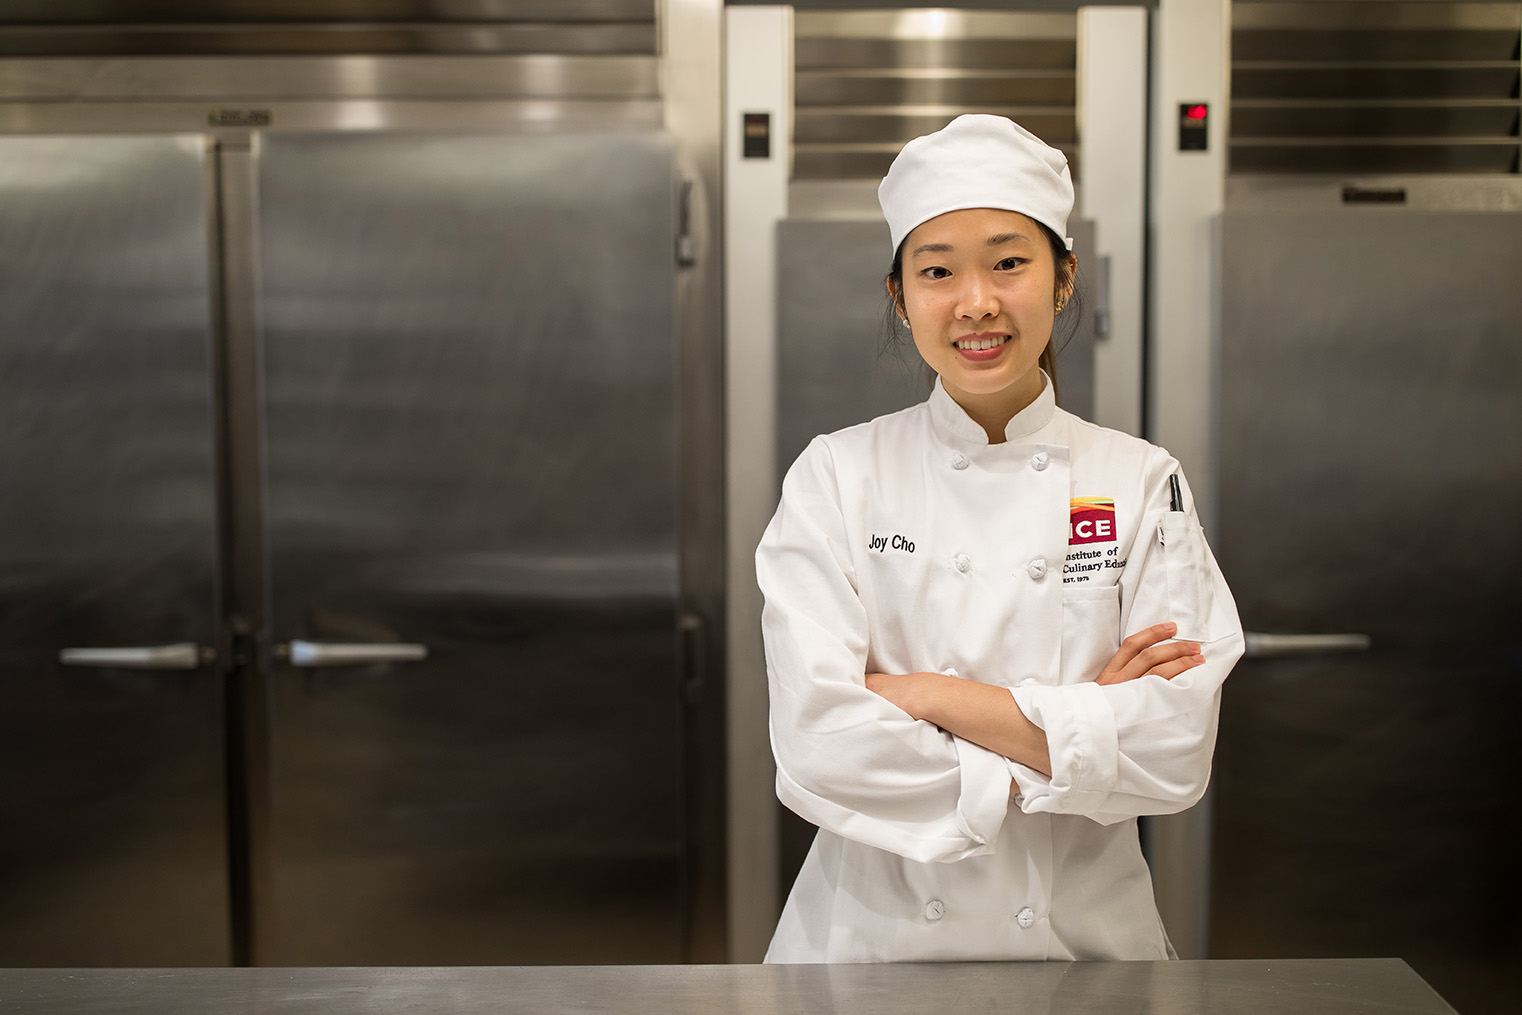 Pastry & Baking Arts student Joy Cho is testing herself for a potential career change.